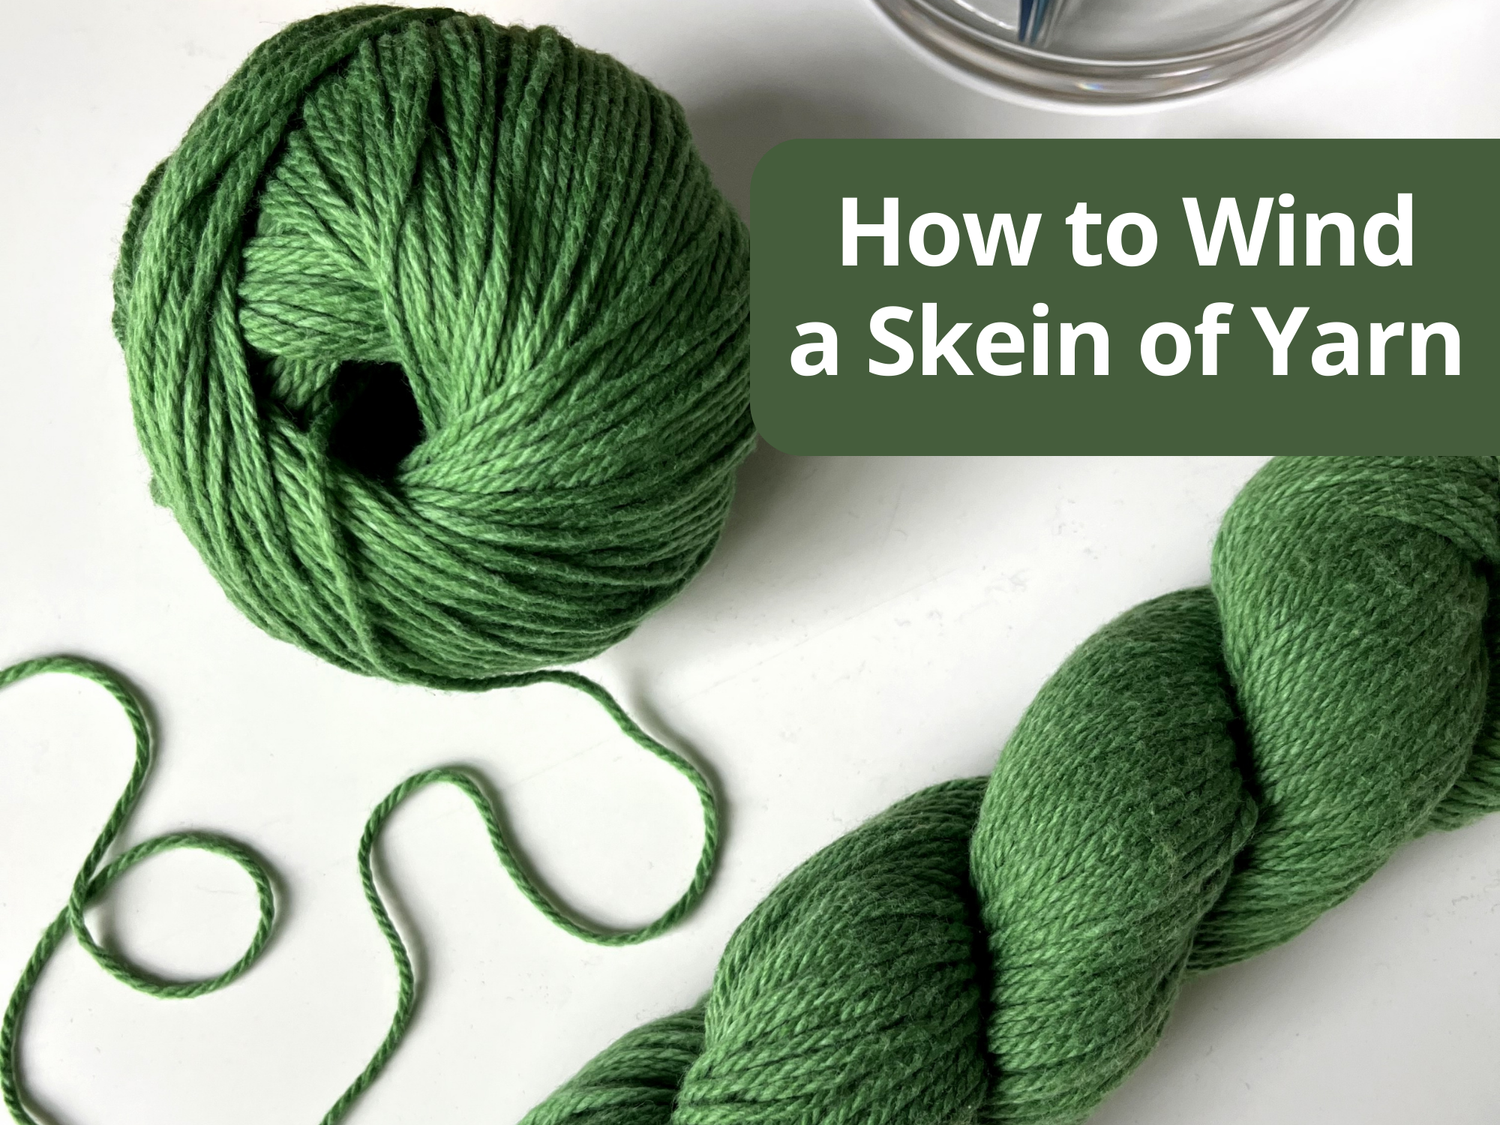 How To Wind Yarn Into a Ball By Hand - Crochet Quick Tip 